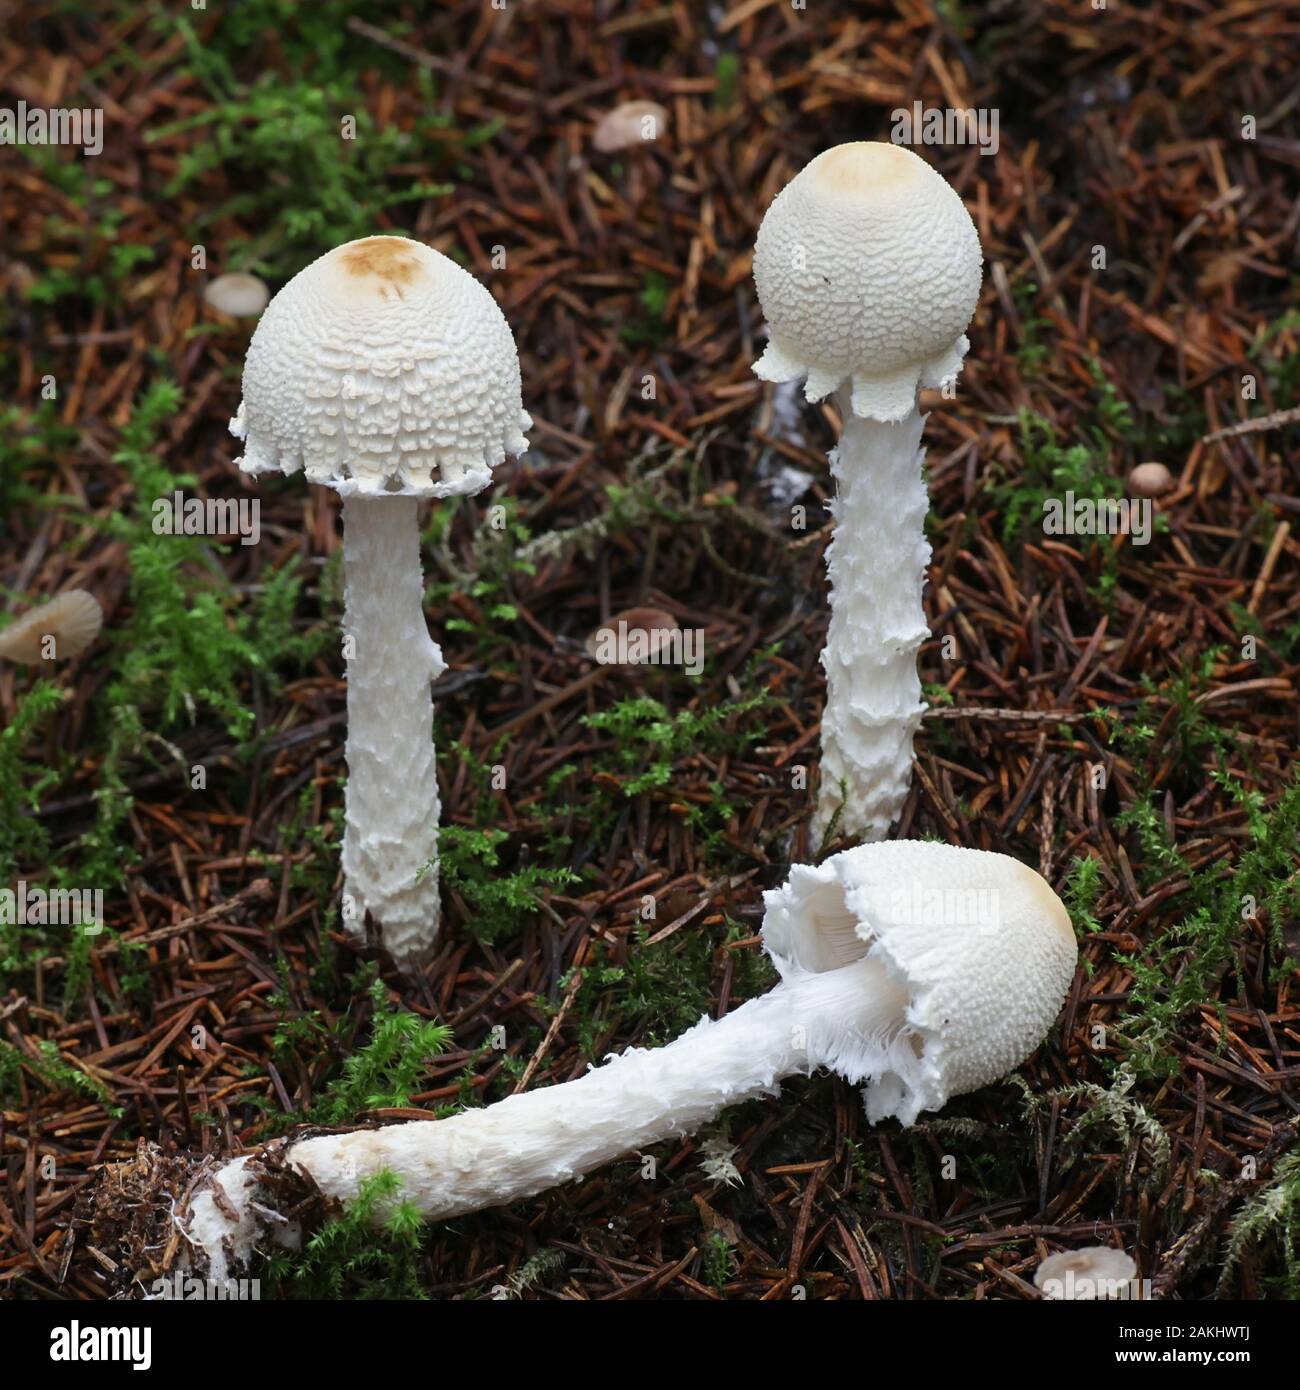 Lepiota clypeolaria, known as the shield dapperling or the shaggy-stalked Lepiota, poisonous mushroom from Finland Stock Photo